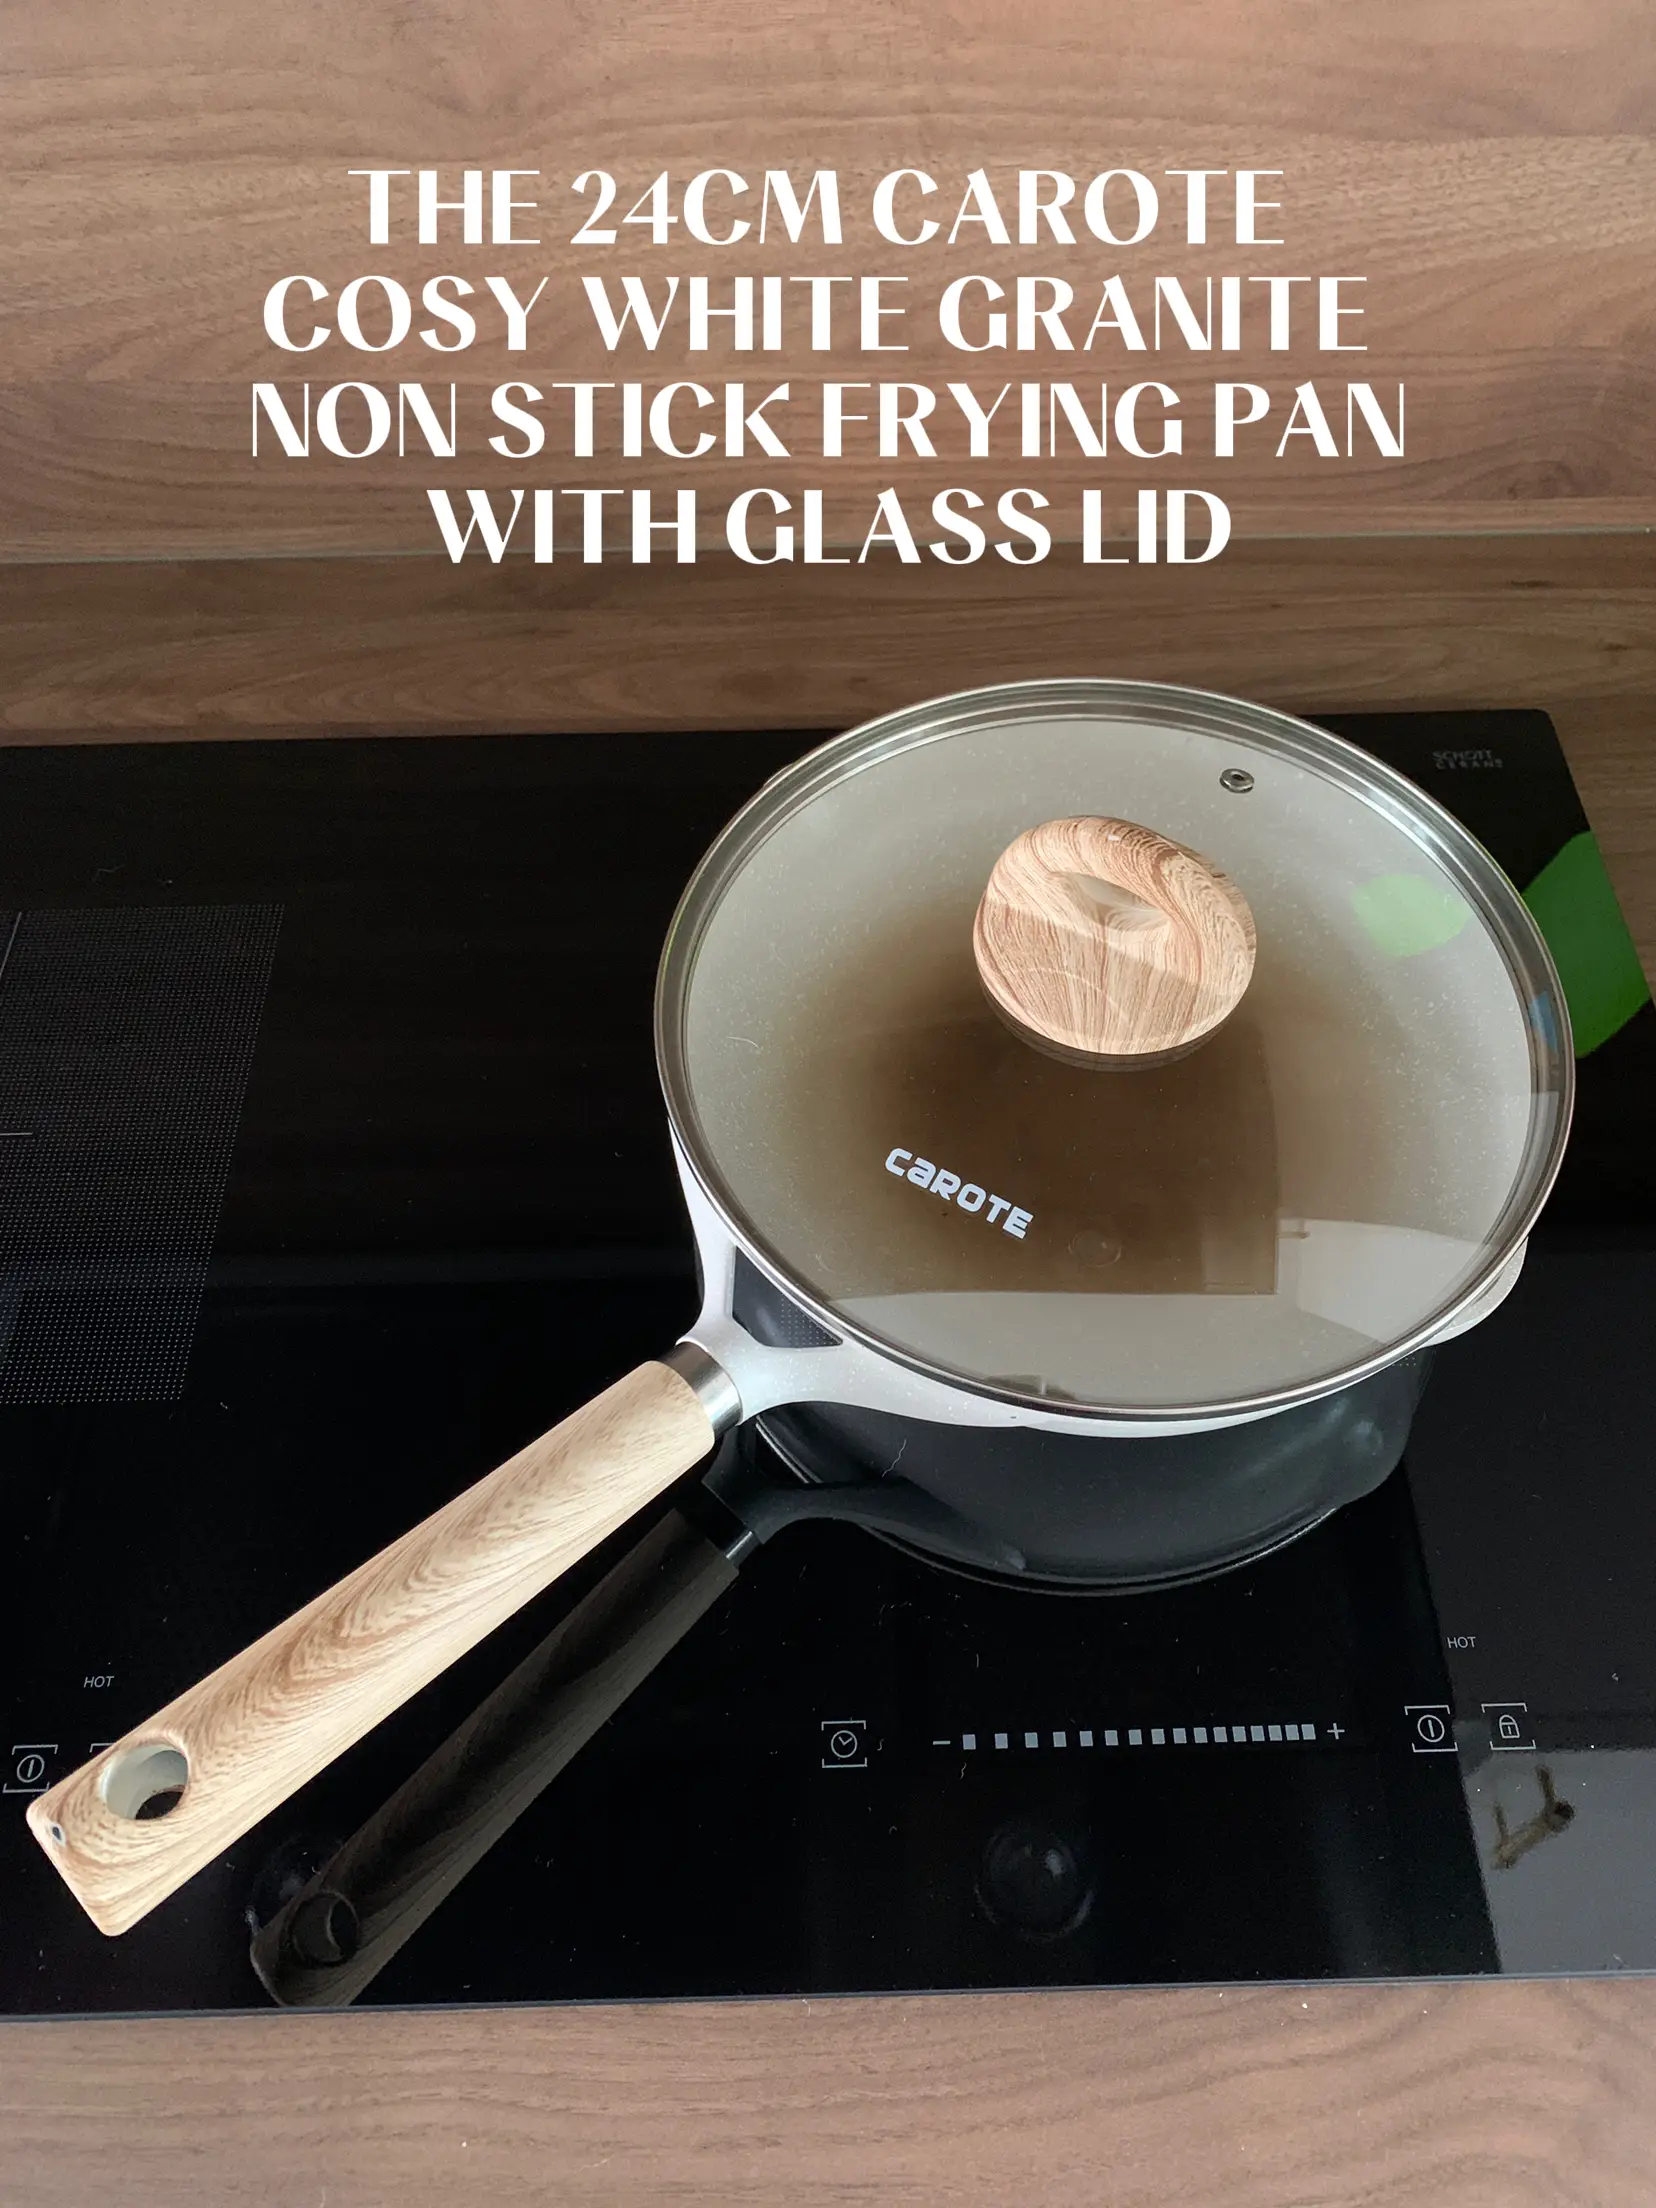 Non Stick Frying Pan that LASTS - 1 year review